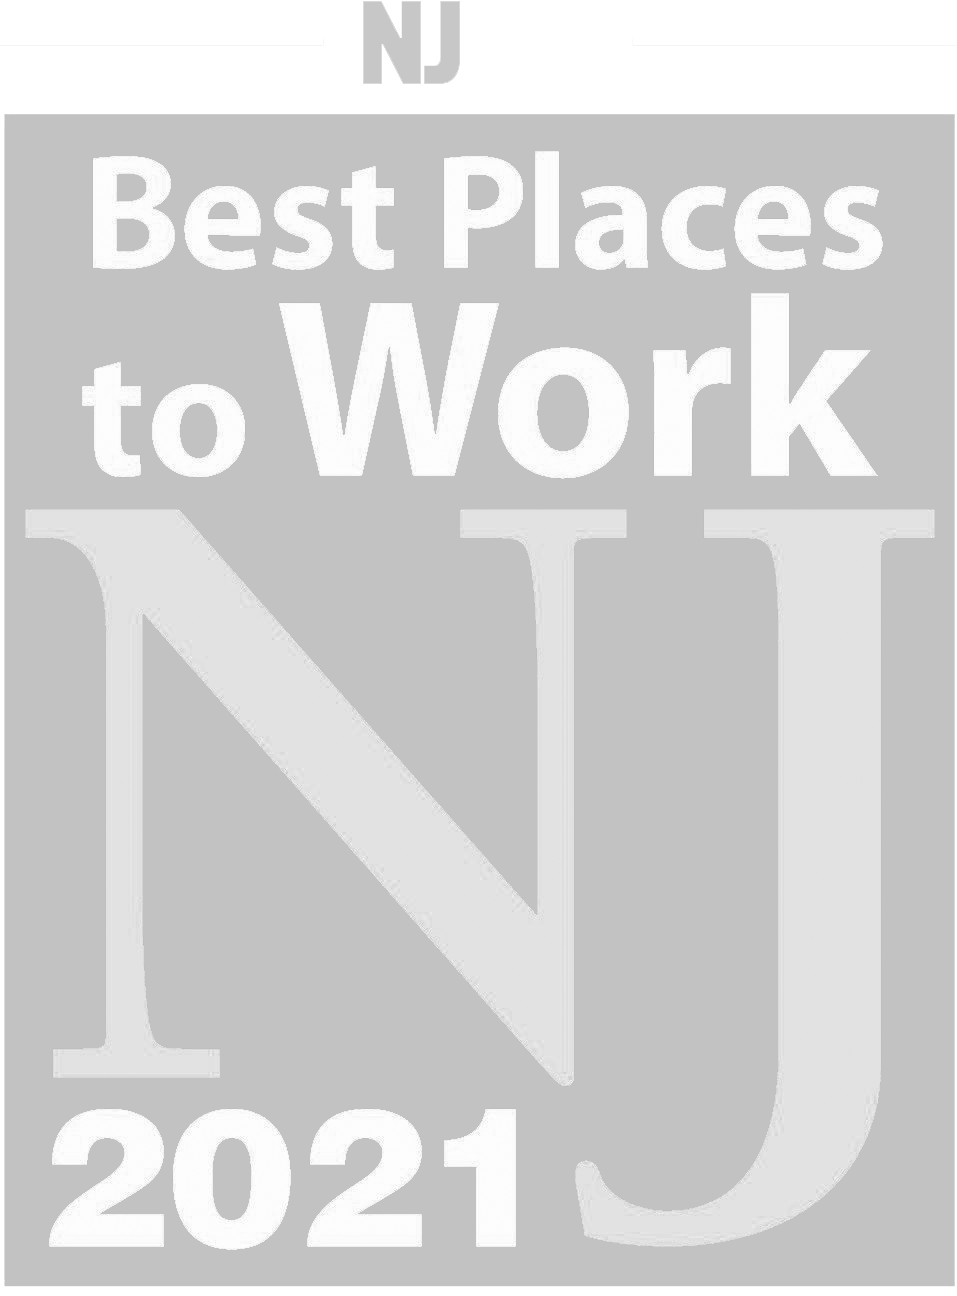 Best place to work NJ 2021